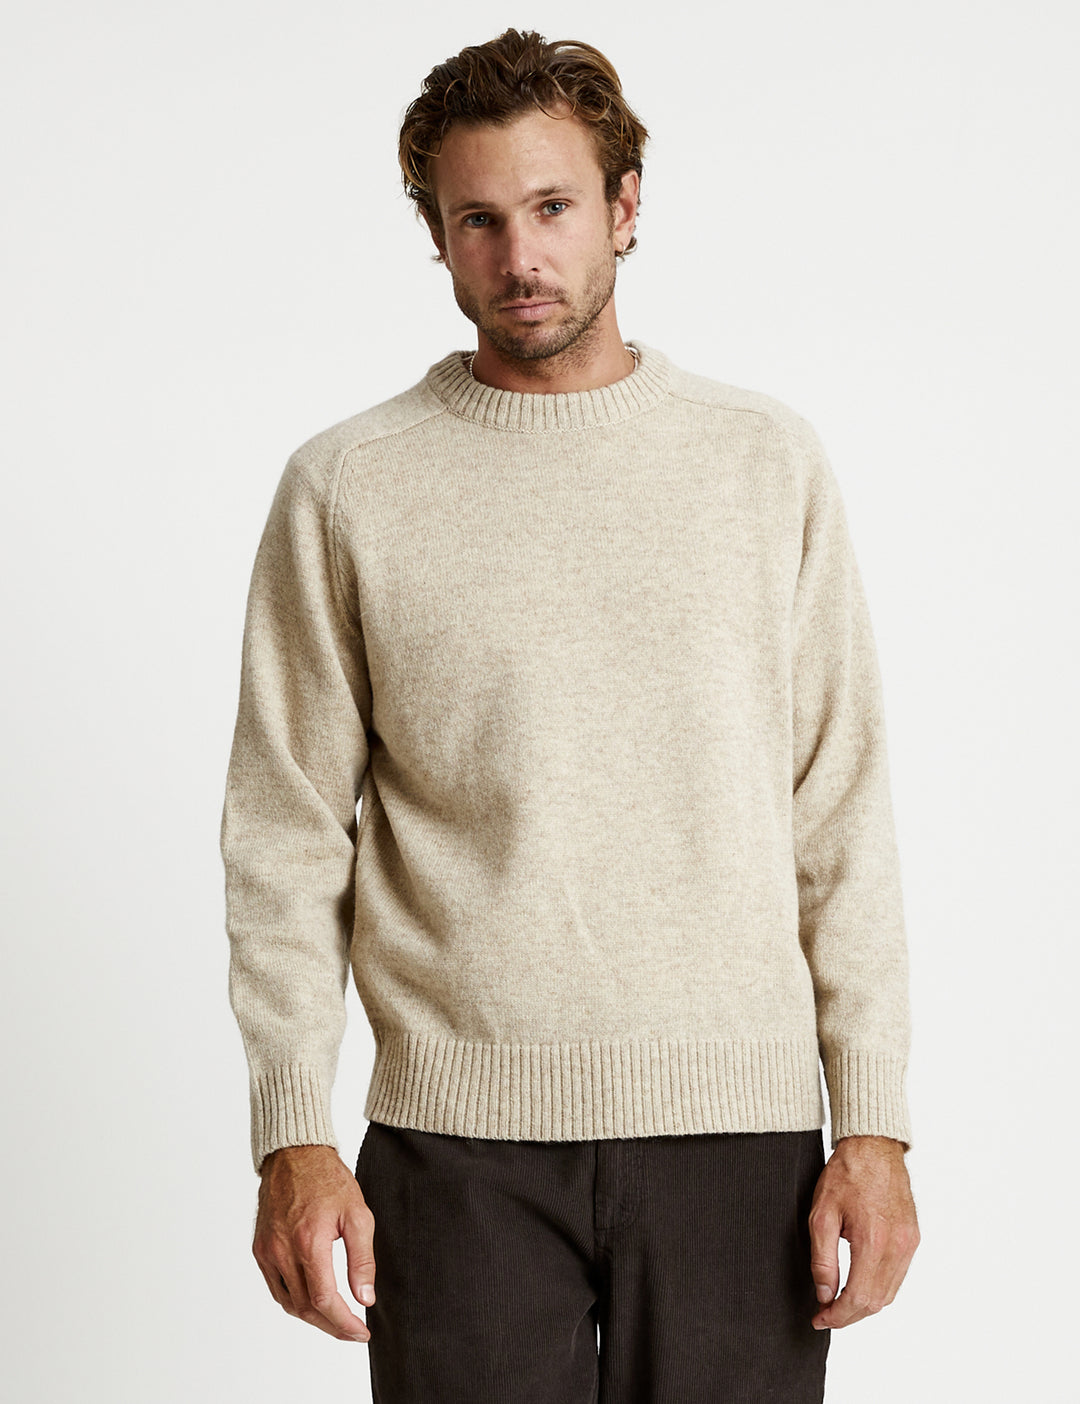 Mr Simple - Portland Knit in Oatmeal | Buster McGee Daylesford